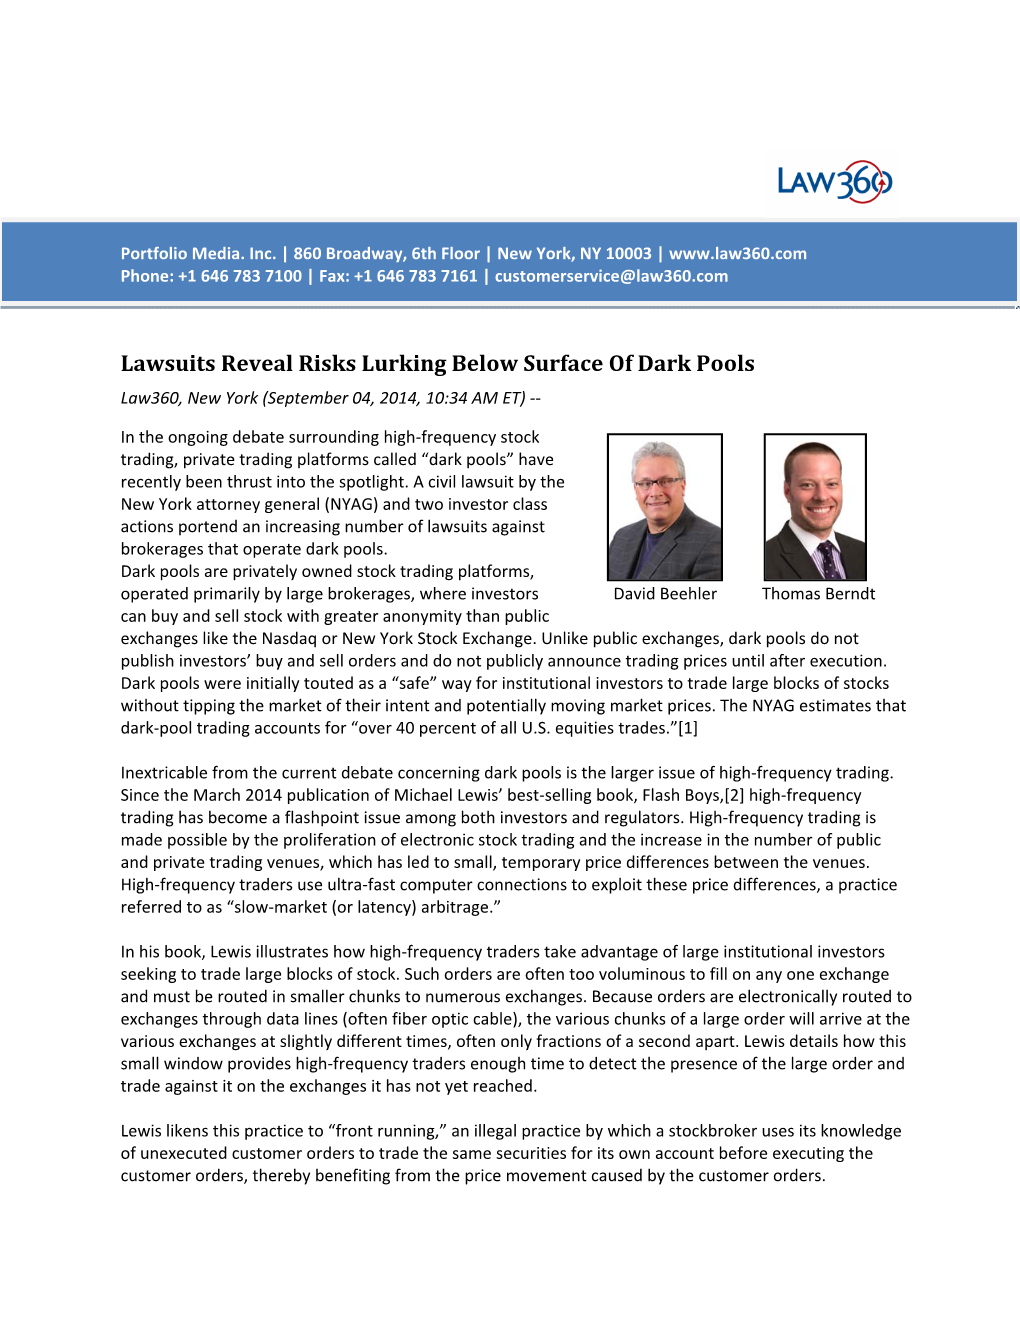 Lawsuits Reveal Risks Lurking Below Surface of Dark Pools Law360, New York (September 04, 2014, 10:34 AM ET) ‐‐